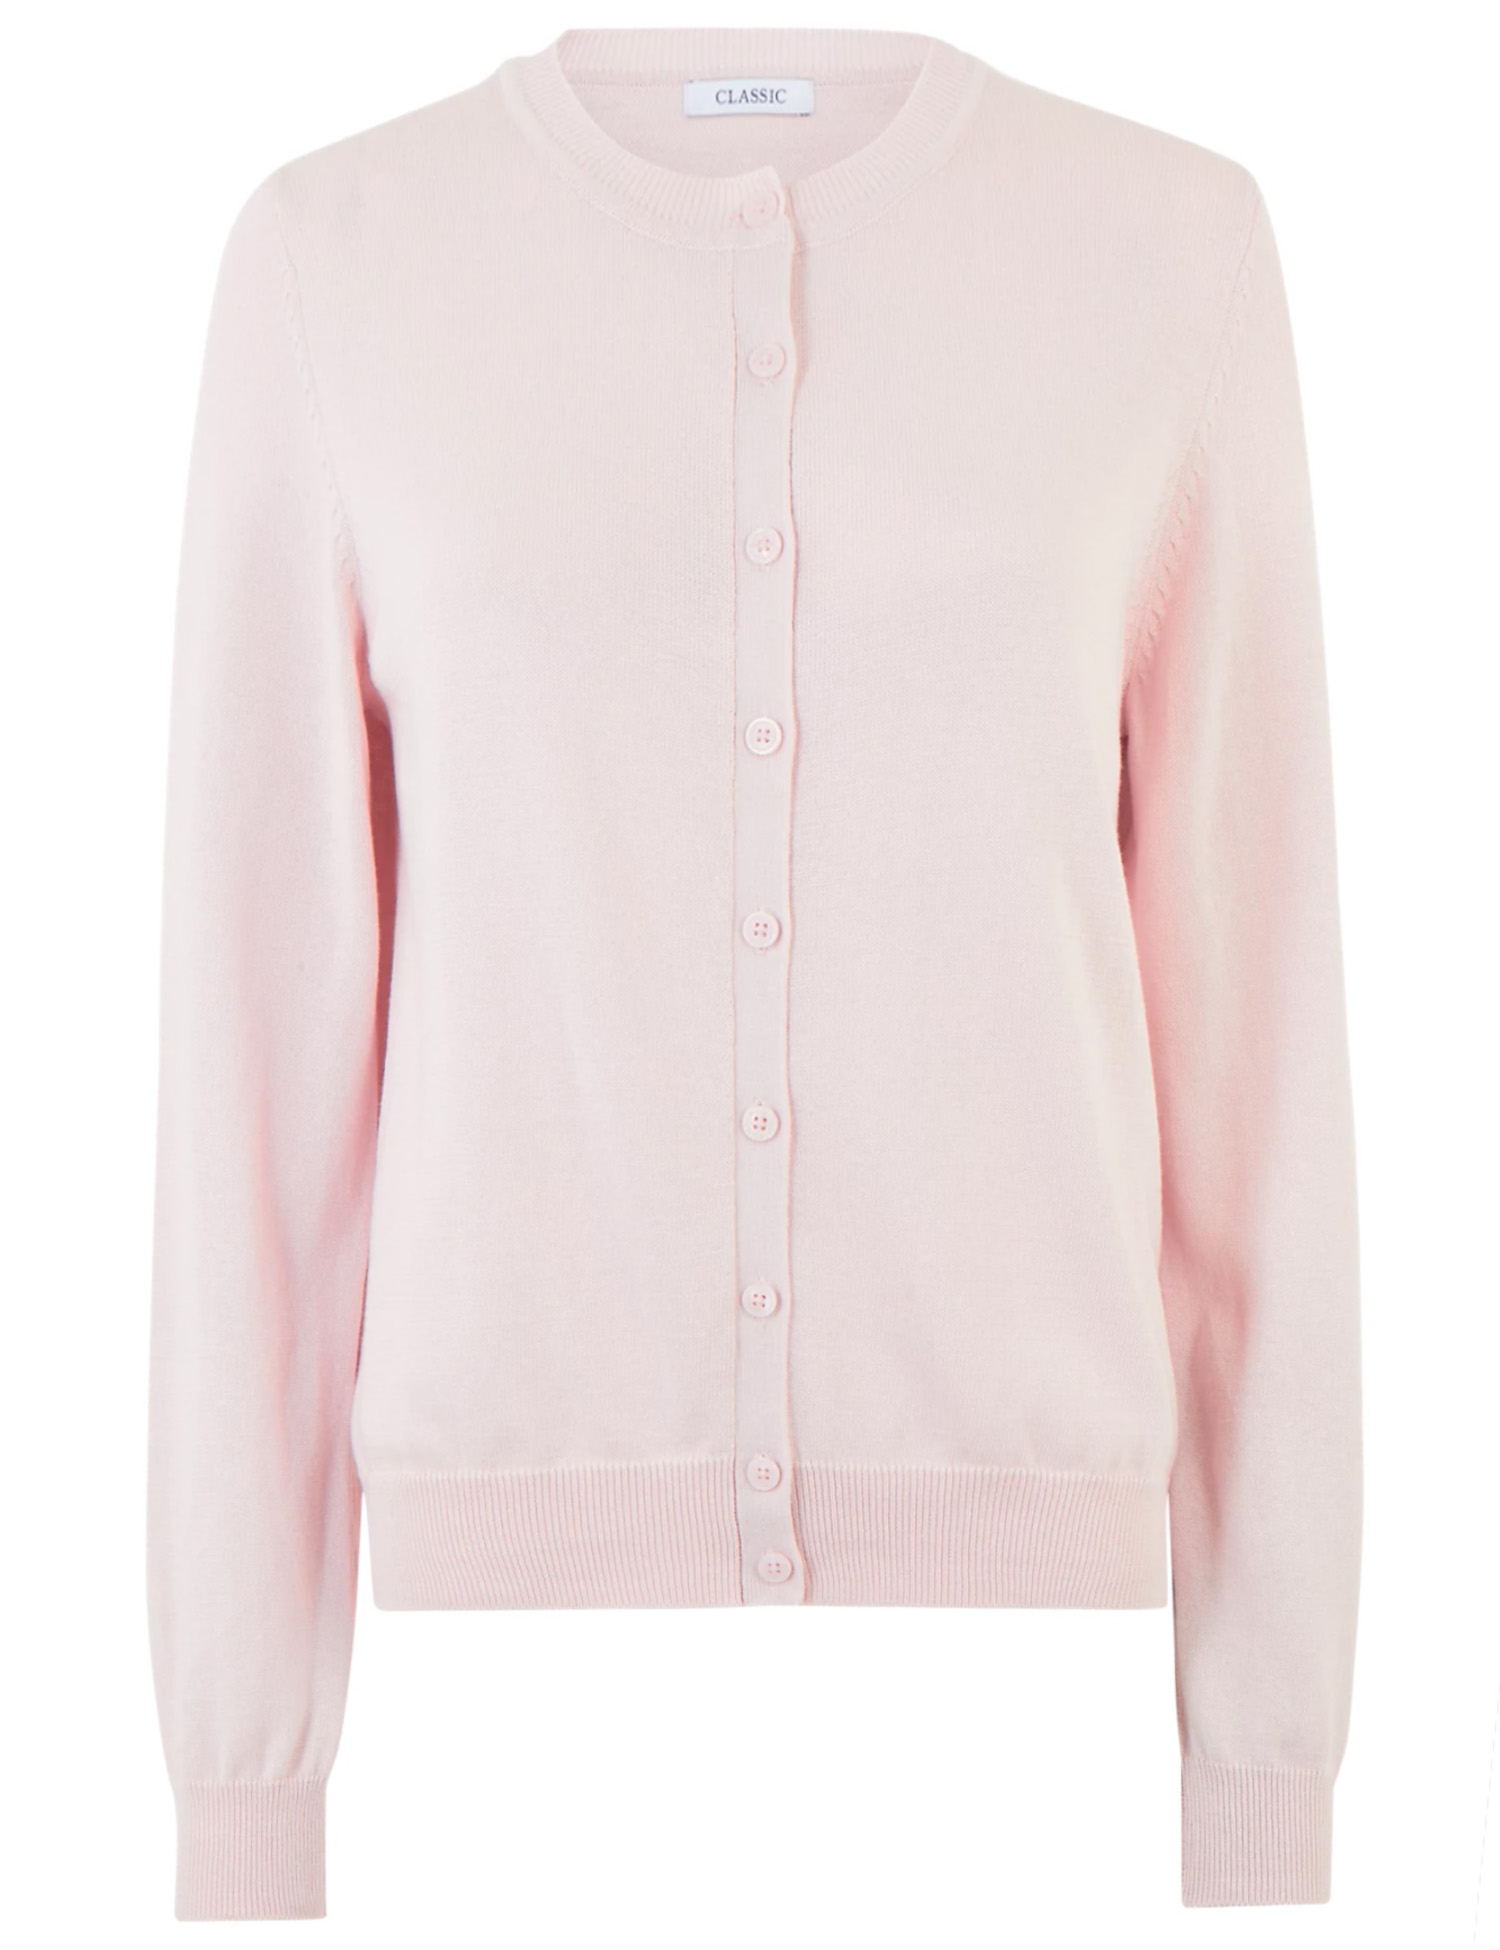 Marks and Spencer - - M&5 LIGHT-PINK Pure Cotton Round Neck Cardigan ...